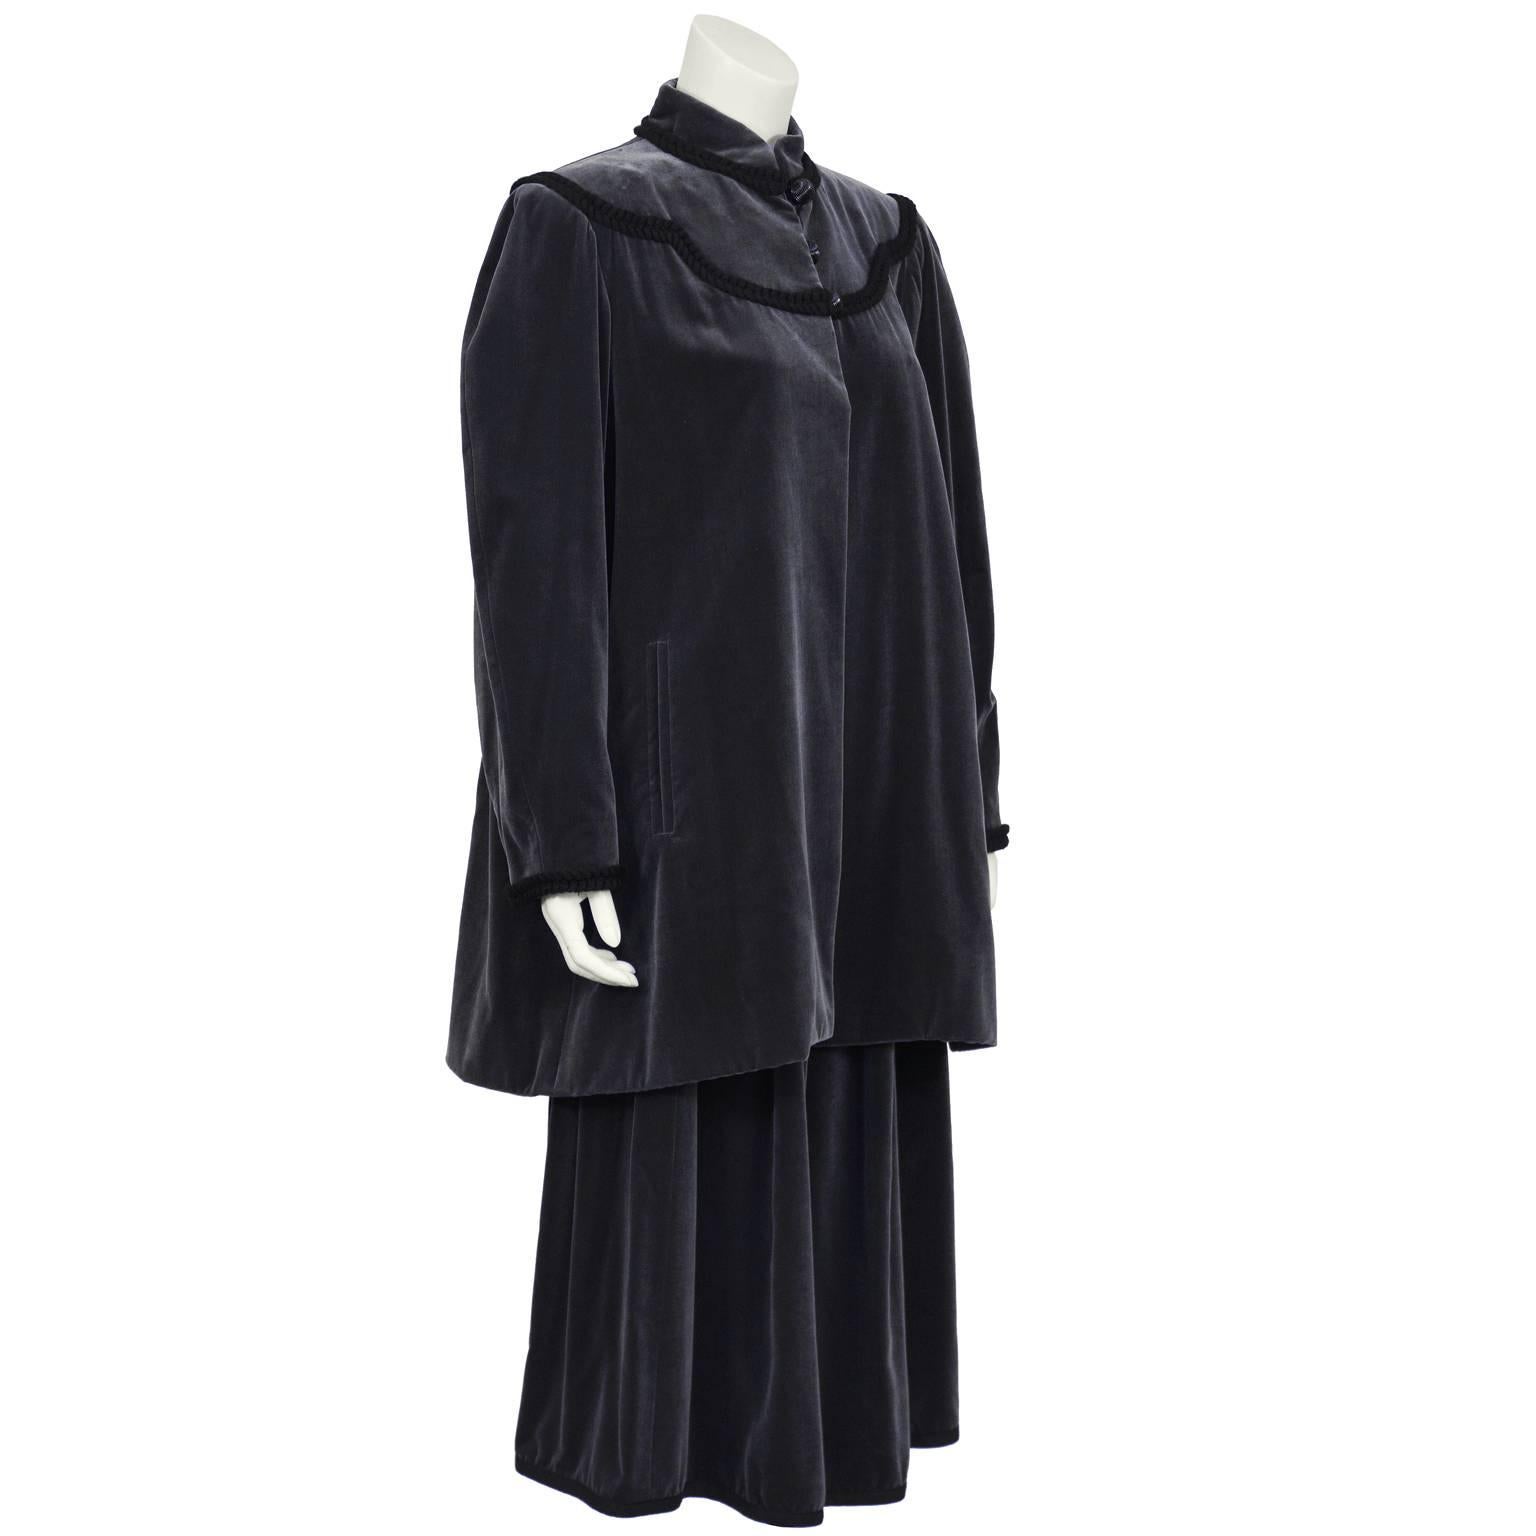 1970's YSL gunmetal grey velvet 2 piece ensemble from the Russian RTW collection. Full cut gathered skirt with black braided trim. Matching loose fit jacket trimmed below collar and around front and back yoke with black braided cord. Can be worn